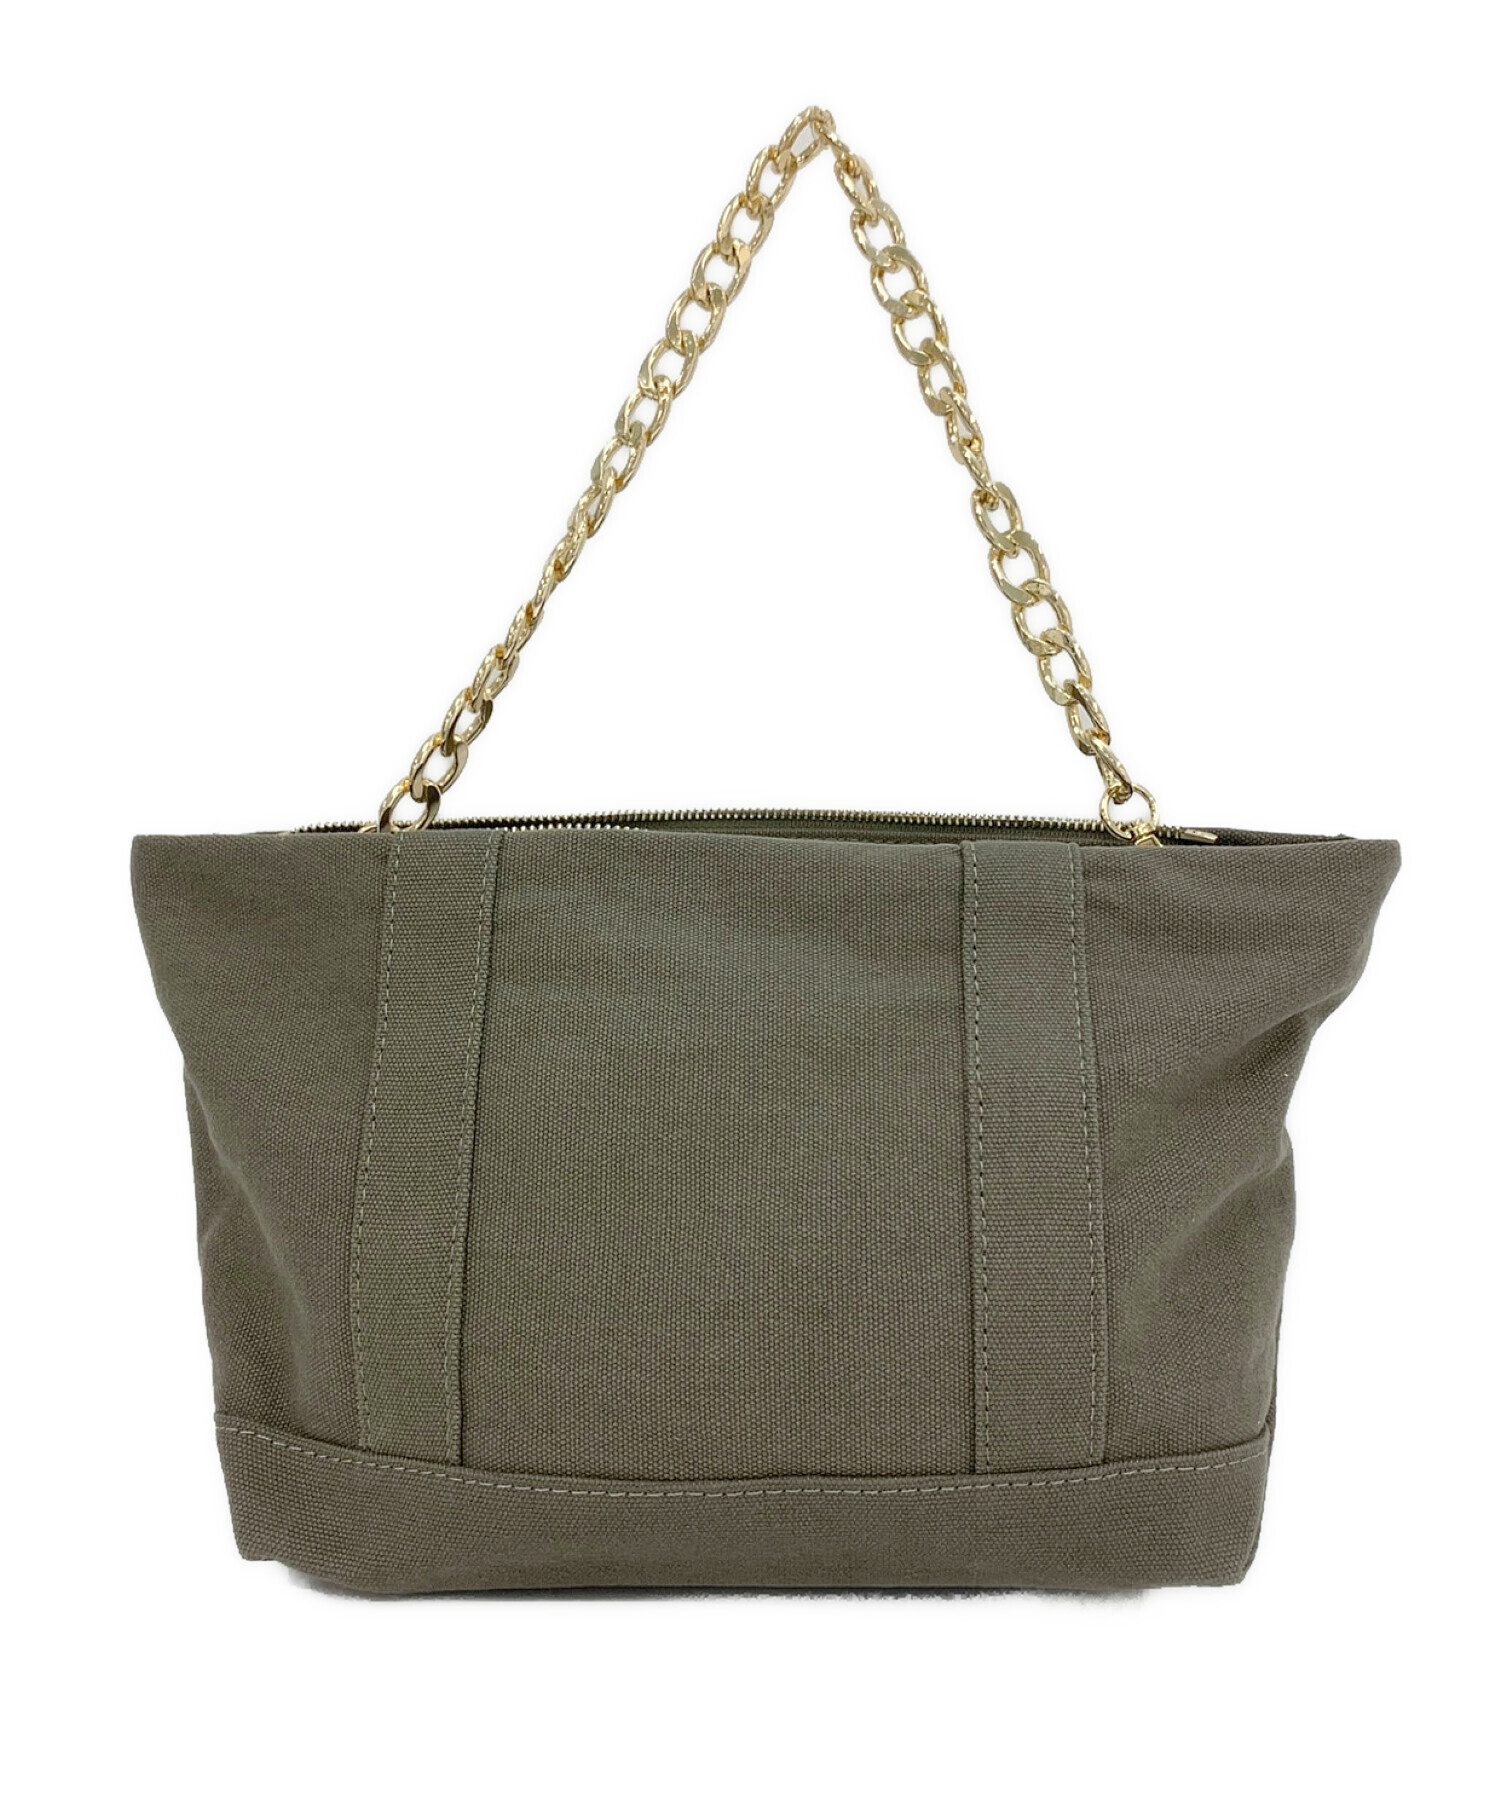 【GOOD GRIEF】Canvas Cluch Bag(L)カーキ